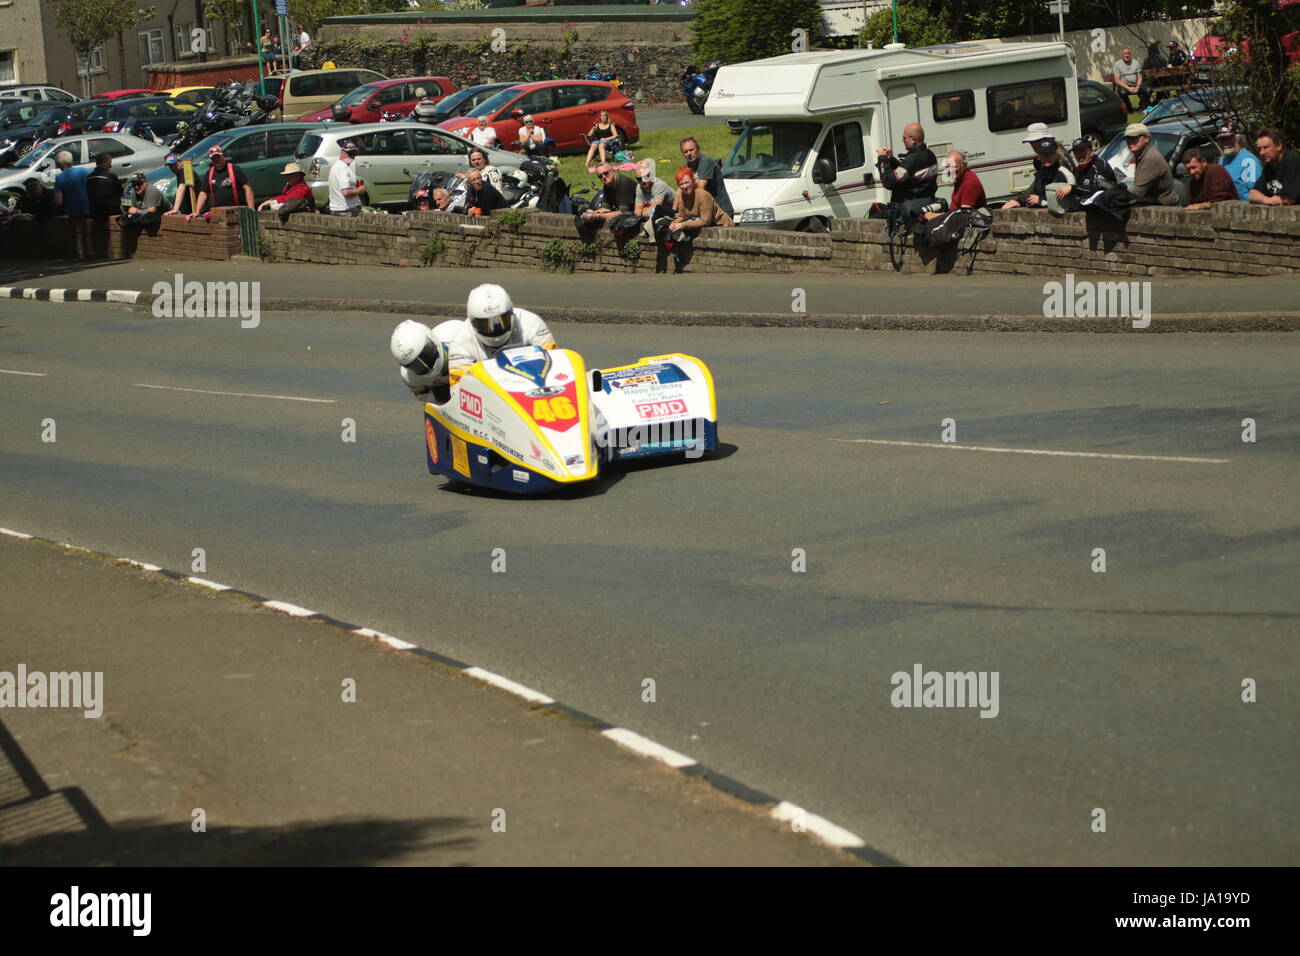 Isle of Man TT Races, Sidecar Qualifying Practice Race, Saturday 3 June 2017.Sidecar qualifying session. Number 46, Mark Saunders and Karl Schofield of the MS Racing team from St Helens on a 600cc Iresson Honda sidecar. Credit: Eclectic Art and Photography/Alamy Live News Stock Photo